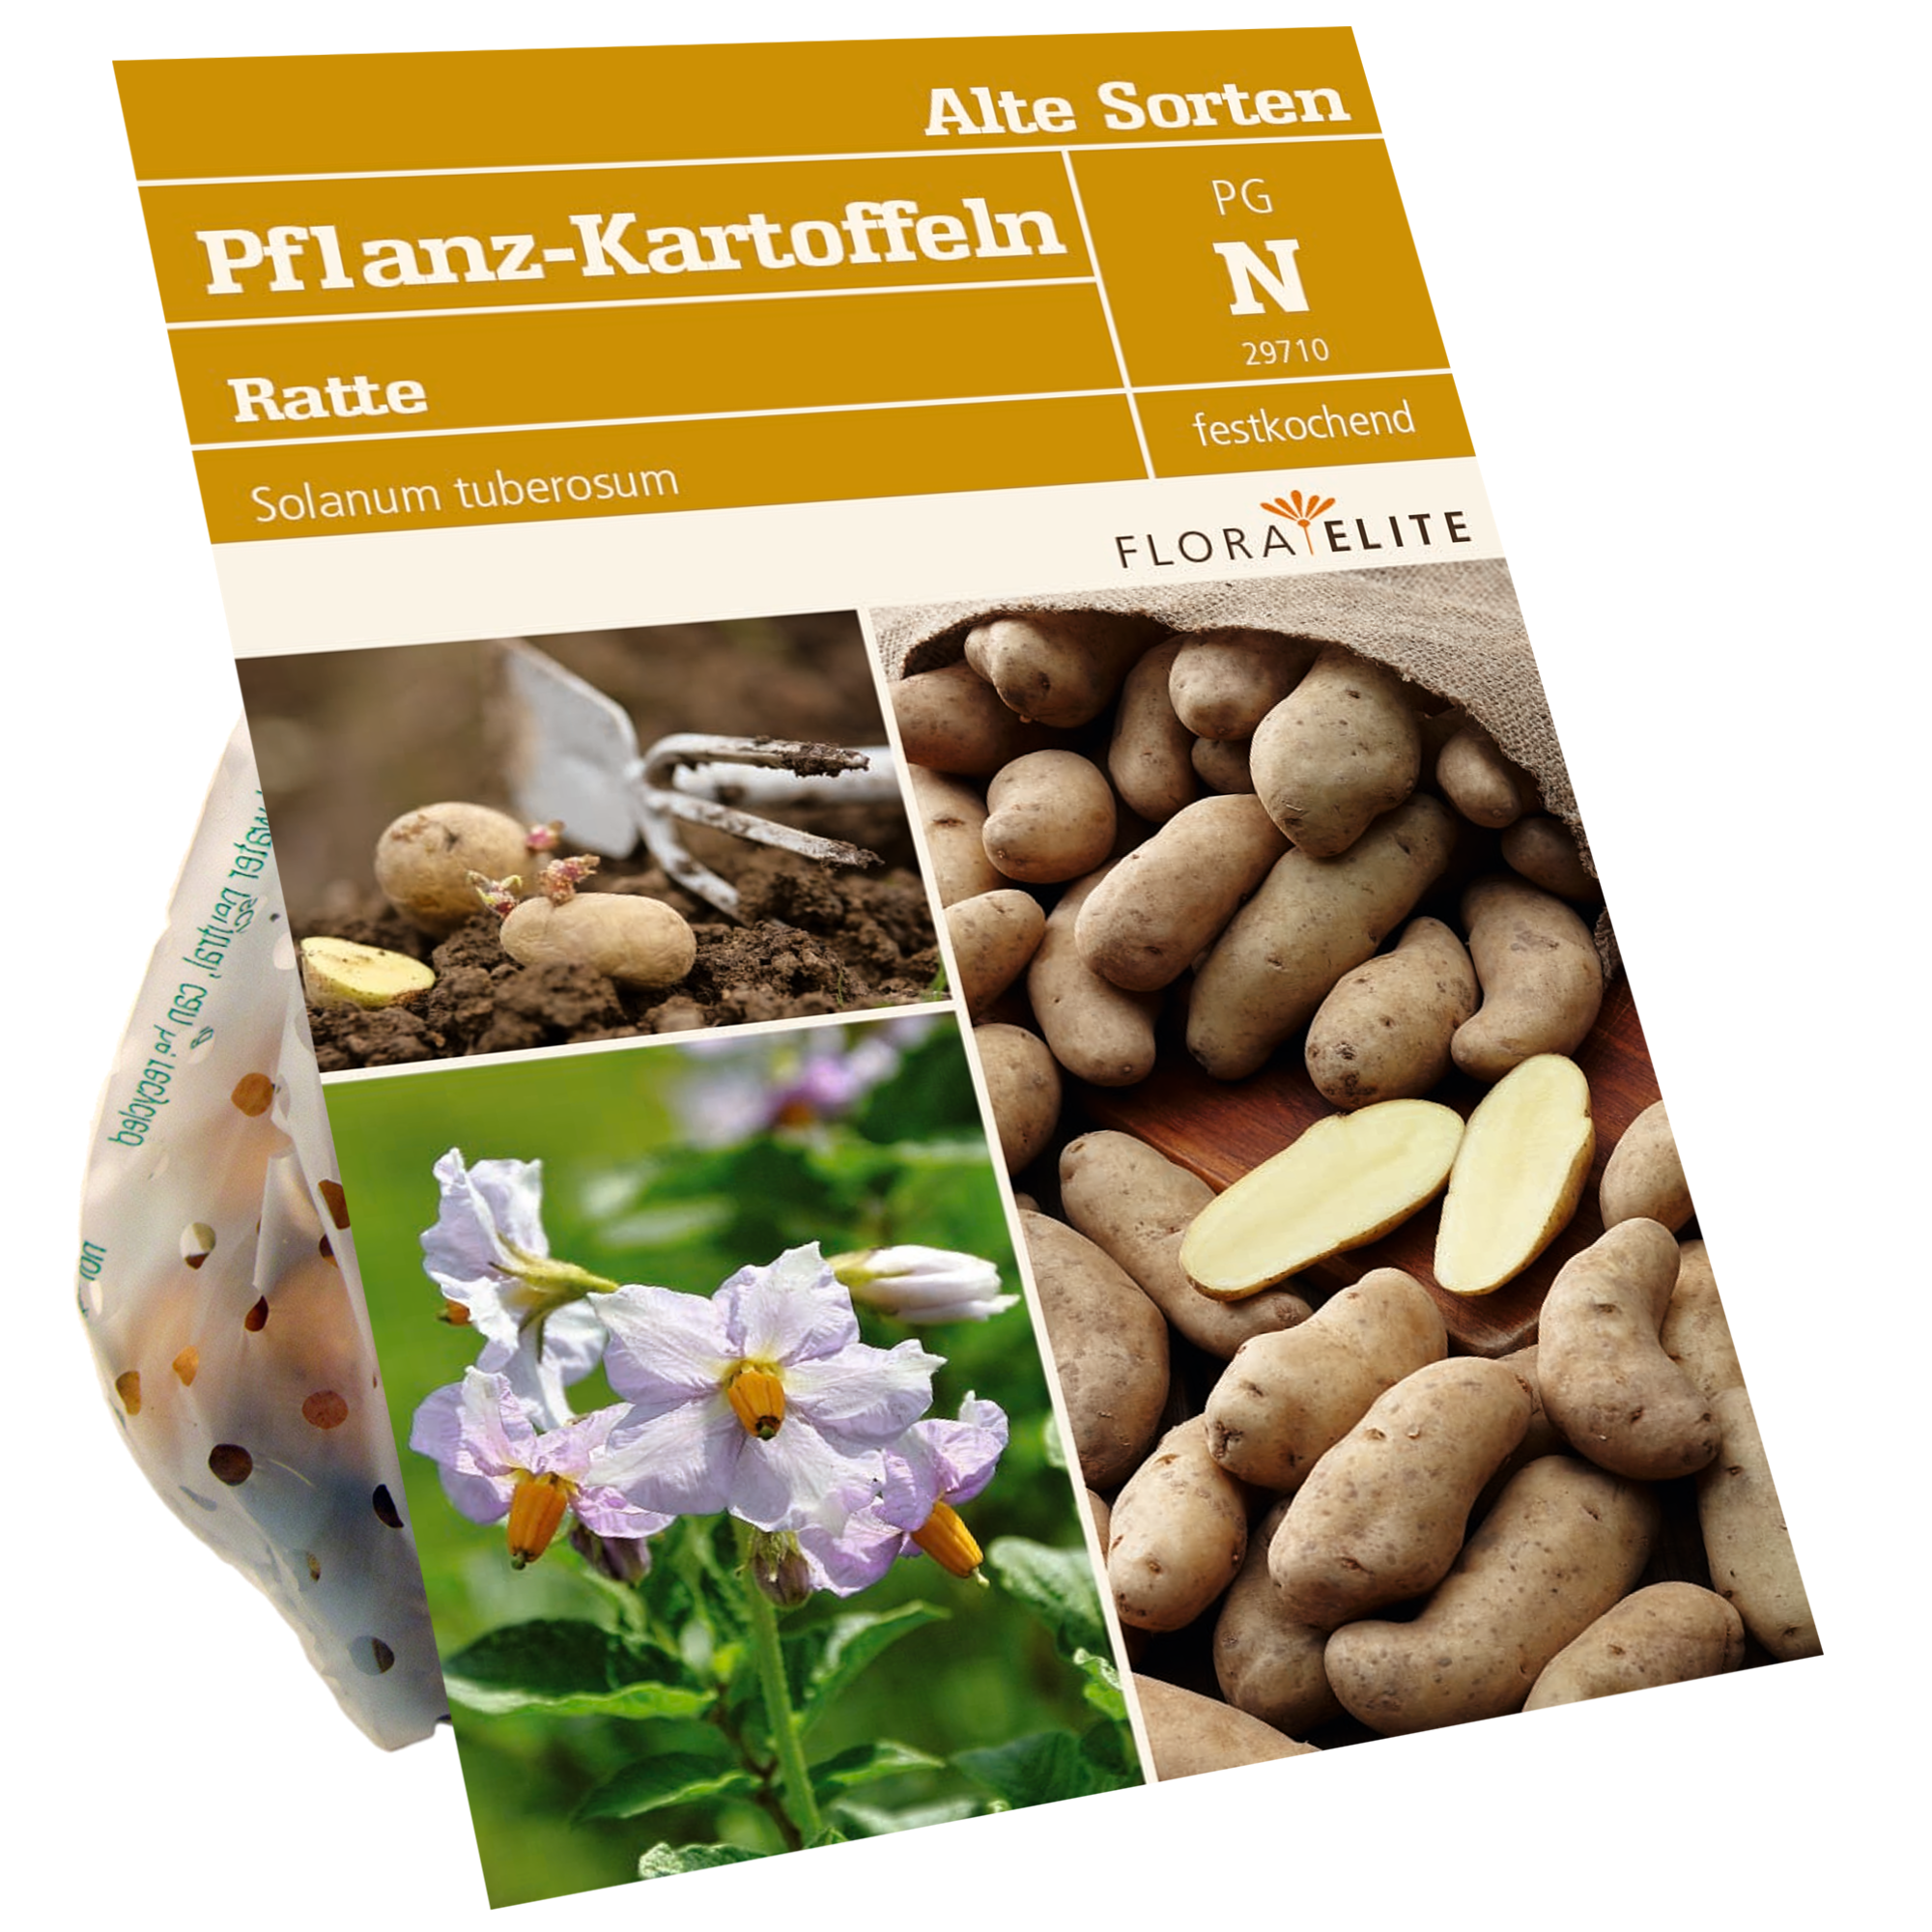 Pflanzkartoffeln 'Ratte' 500 g + product picture